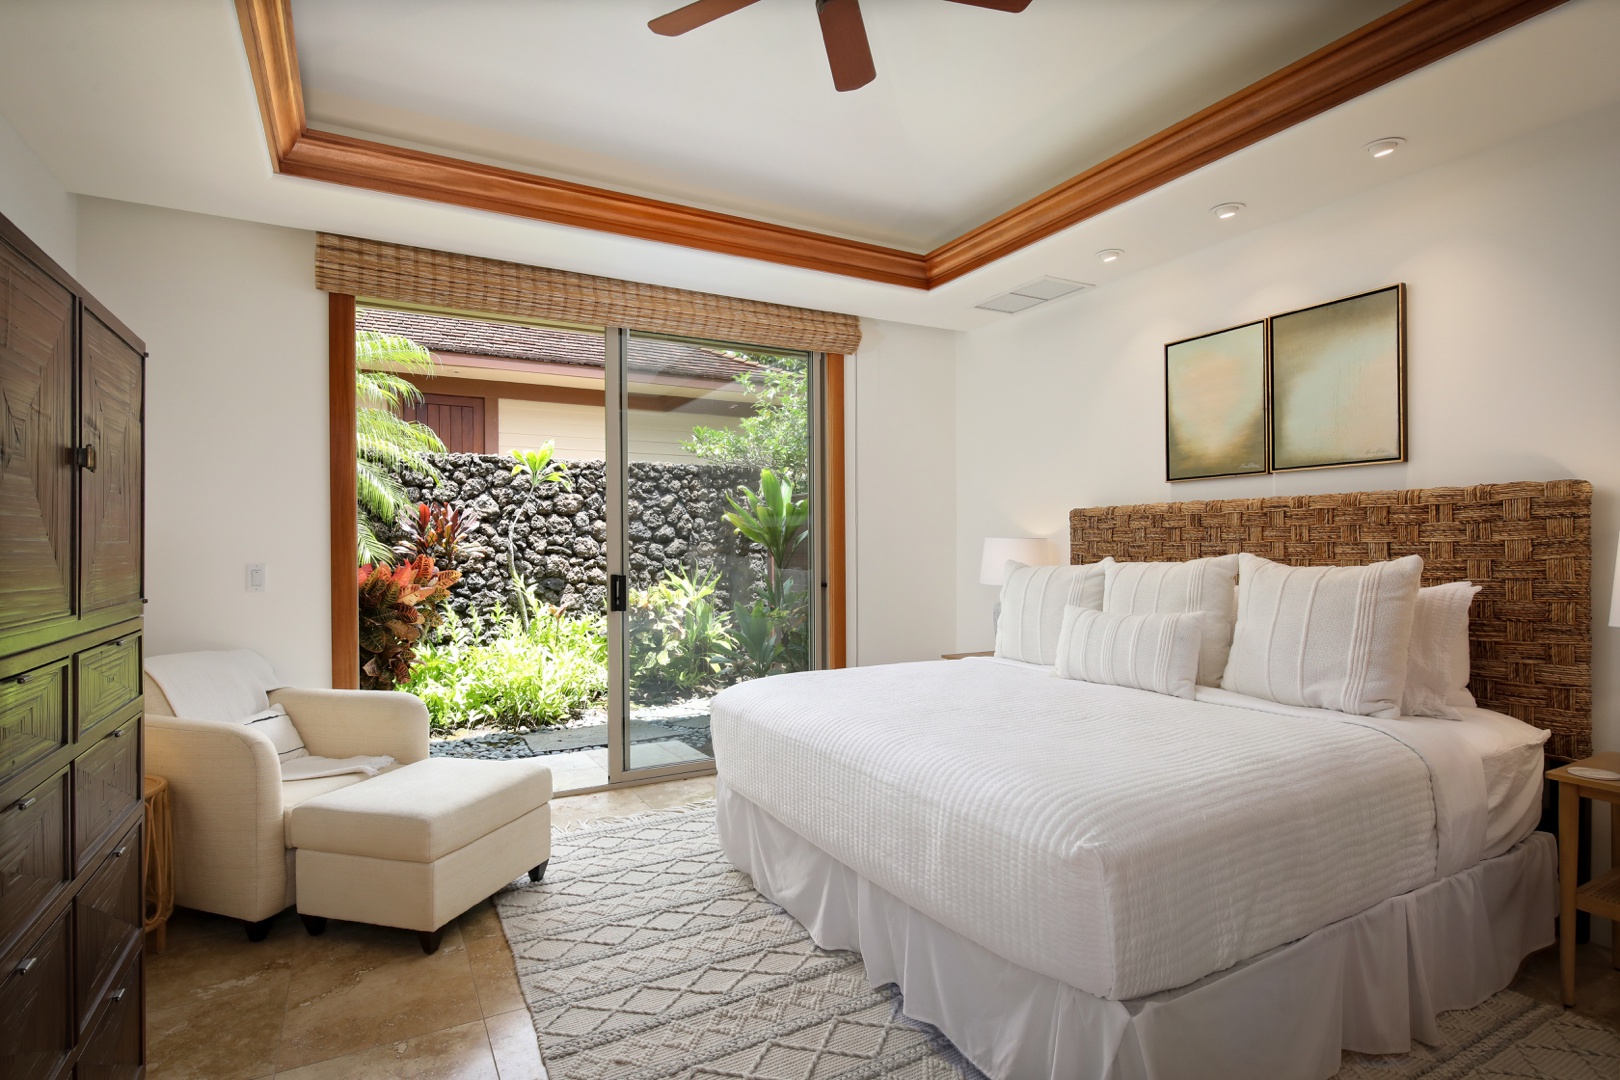 Kailua Kona Vacation Rentals, 4BD Pakui Street (147) Estate Home at Four Seasons Resort at Hualalai - Guest Suite #4 w/king bed, television, en suite bath and private entrance off the interior walkway.